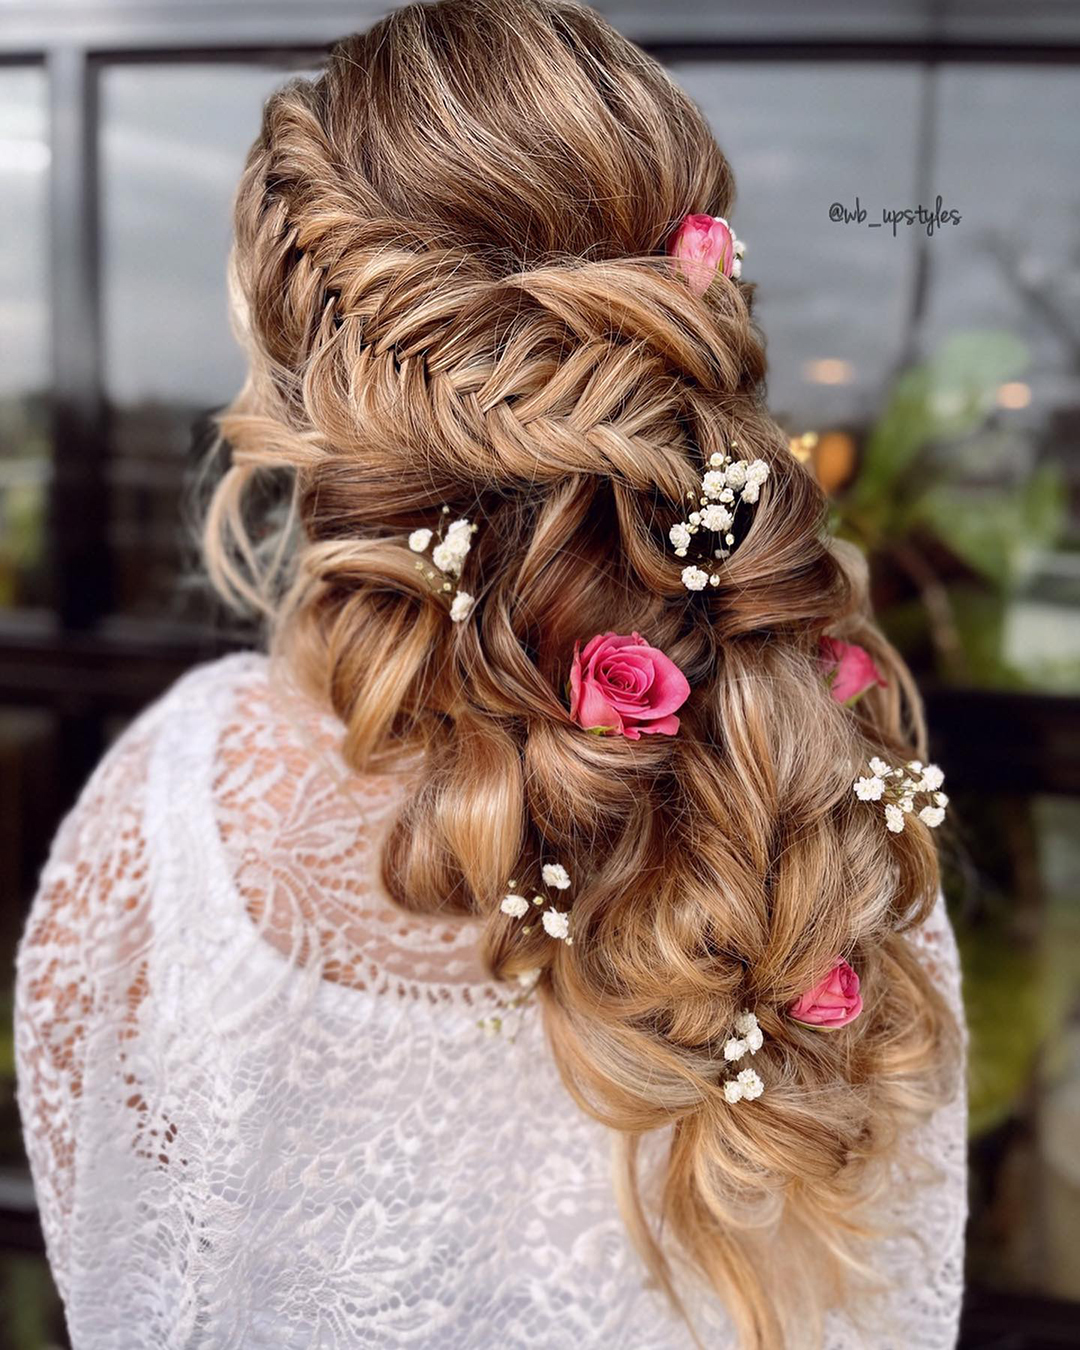 summer wedding hairstyles hulf up with flowers wb_upstyles